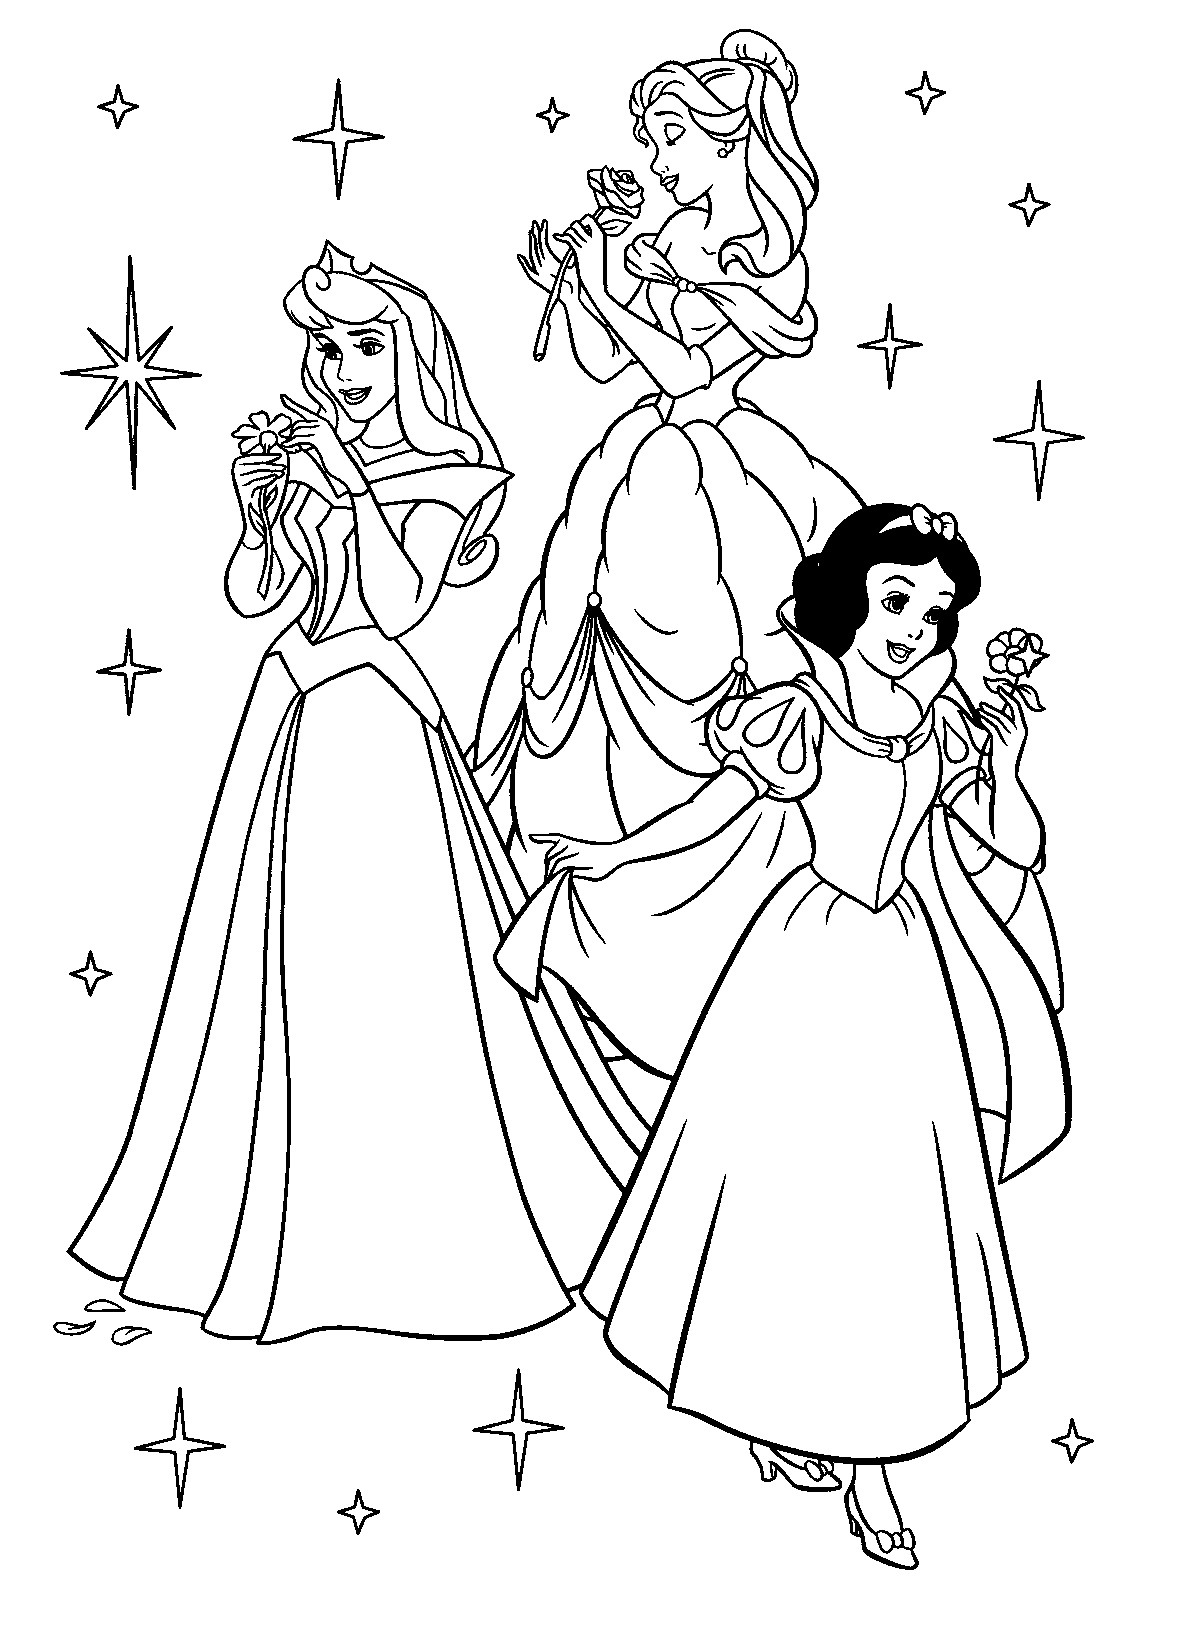 Coloring Pages For Kids Princesses
 ディズニー プリンセス 塗り絵 無料～オーロラ・ベル・白雪 ディズニーキャラクターのぬりえ（塗り絵） 画像素材